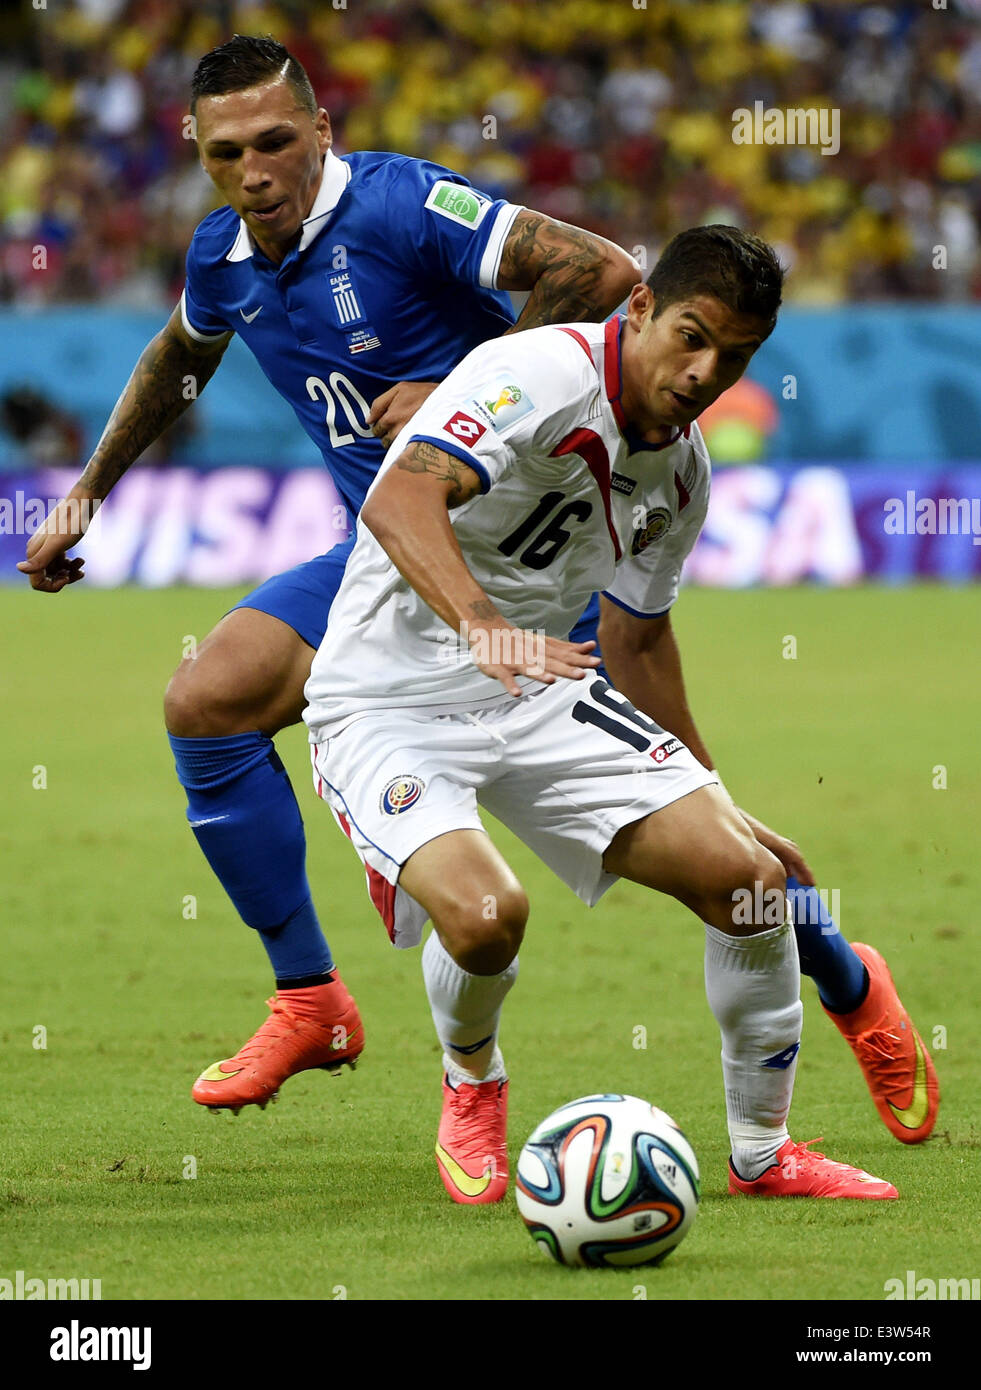 (140629) -- RECIFE, June 29, 2014 (Xinhua) -- Costa Rica's Christian Gamboa (front) vies with Greece's Jose Cholevas during a Round of 16 match between Costa Rica and Greece of 2014 FIFA World Cup at the Arena Pernambuco Stadium in Recife, Brazil, on June 29, 2014.(Xinhua/Lui Siu Wai)(pcy) Stock Photo